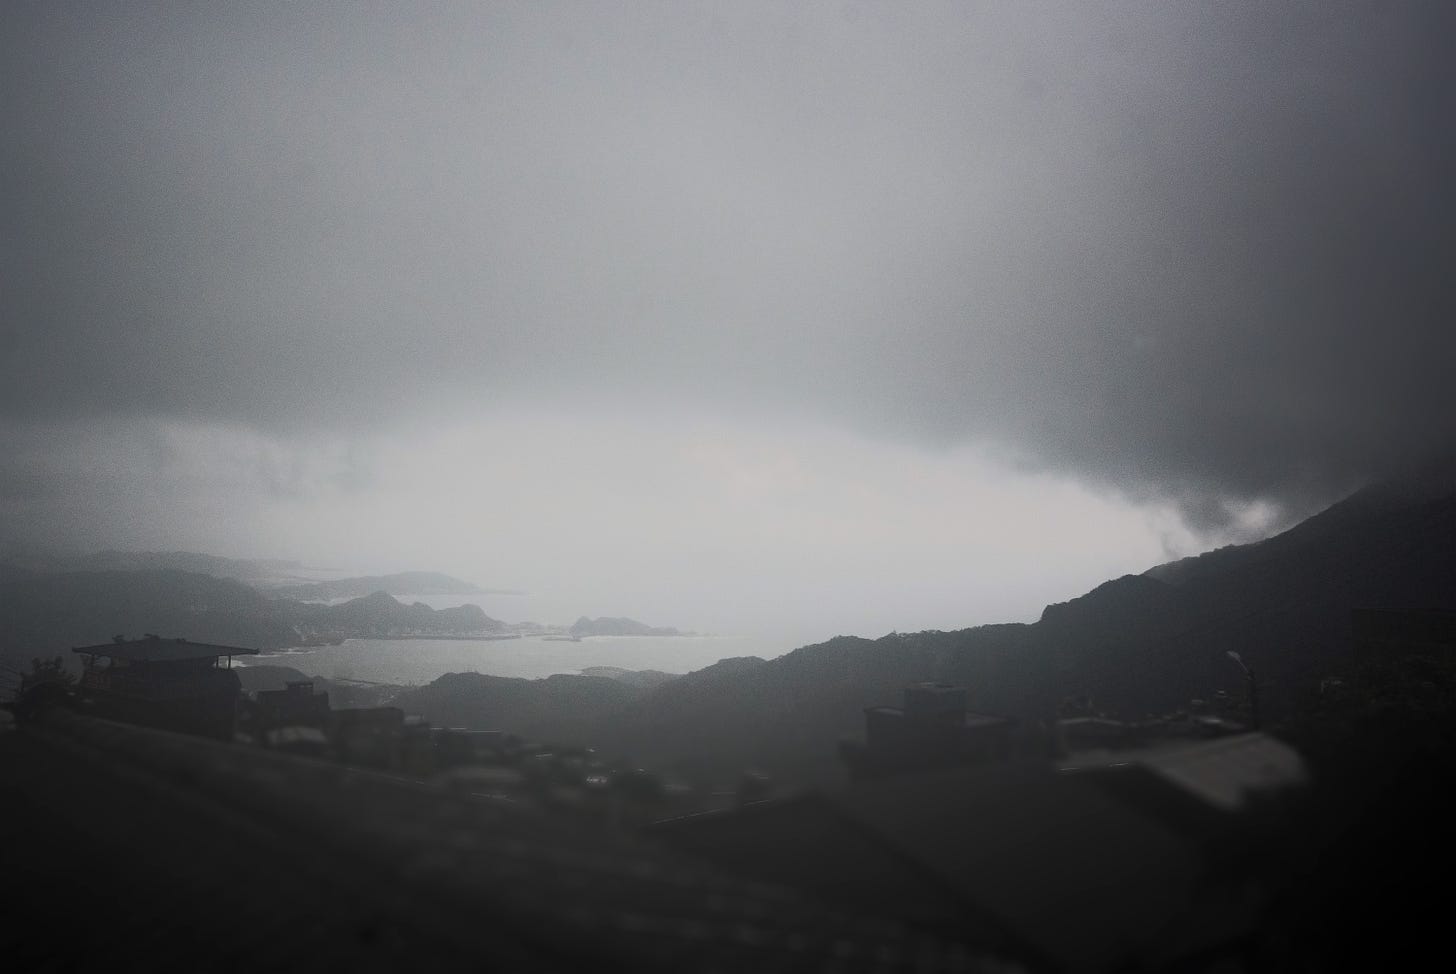 Dramatic clouds hang low over the bay below Jiufen, a vista made famous by Hou Hsiao-hsien's "City of Sadness"